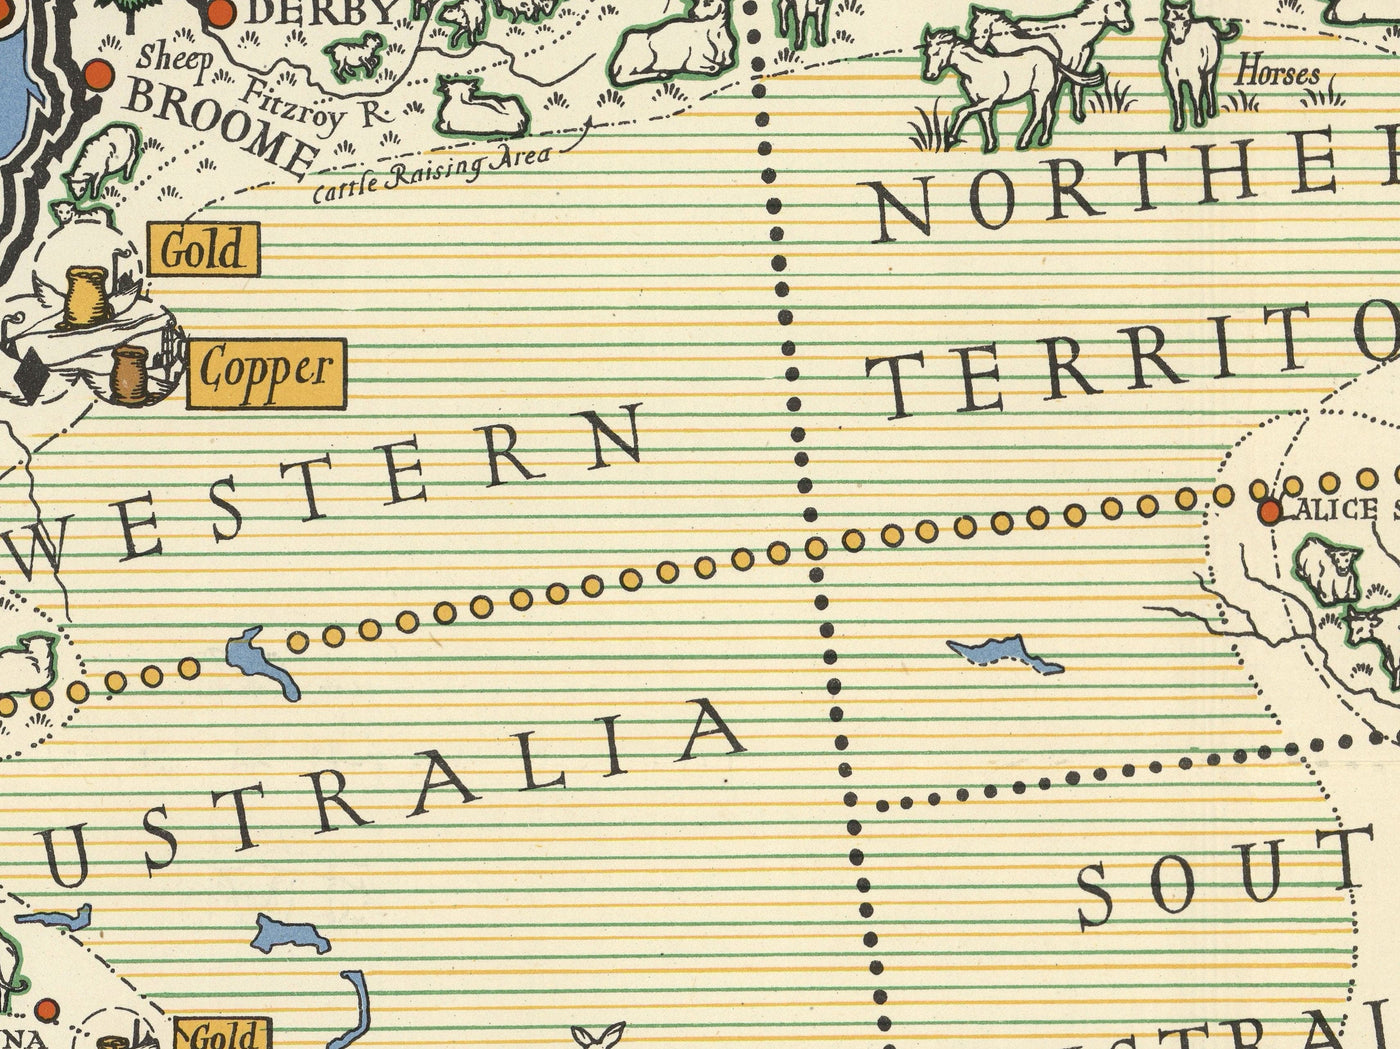 Old Map of Australia, 1942 by Max Gill - World War 2 Map of Natural & Industrial Resources